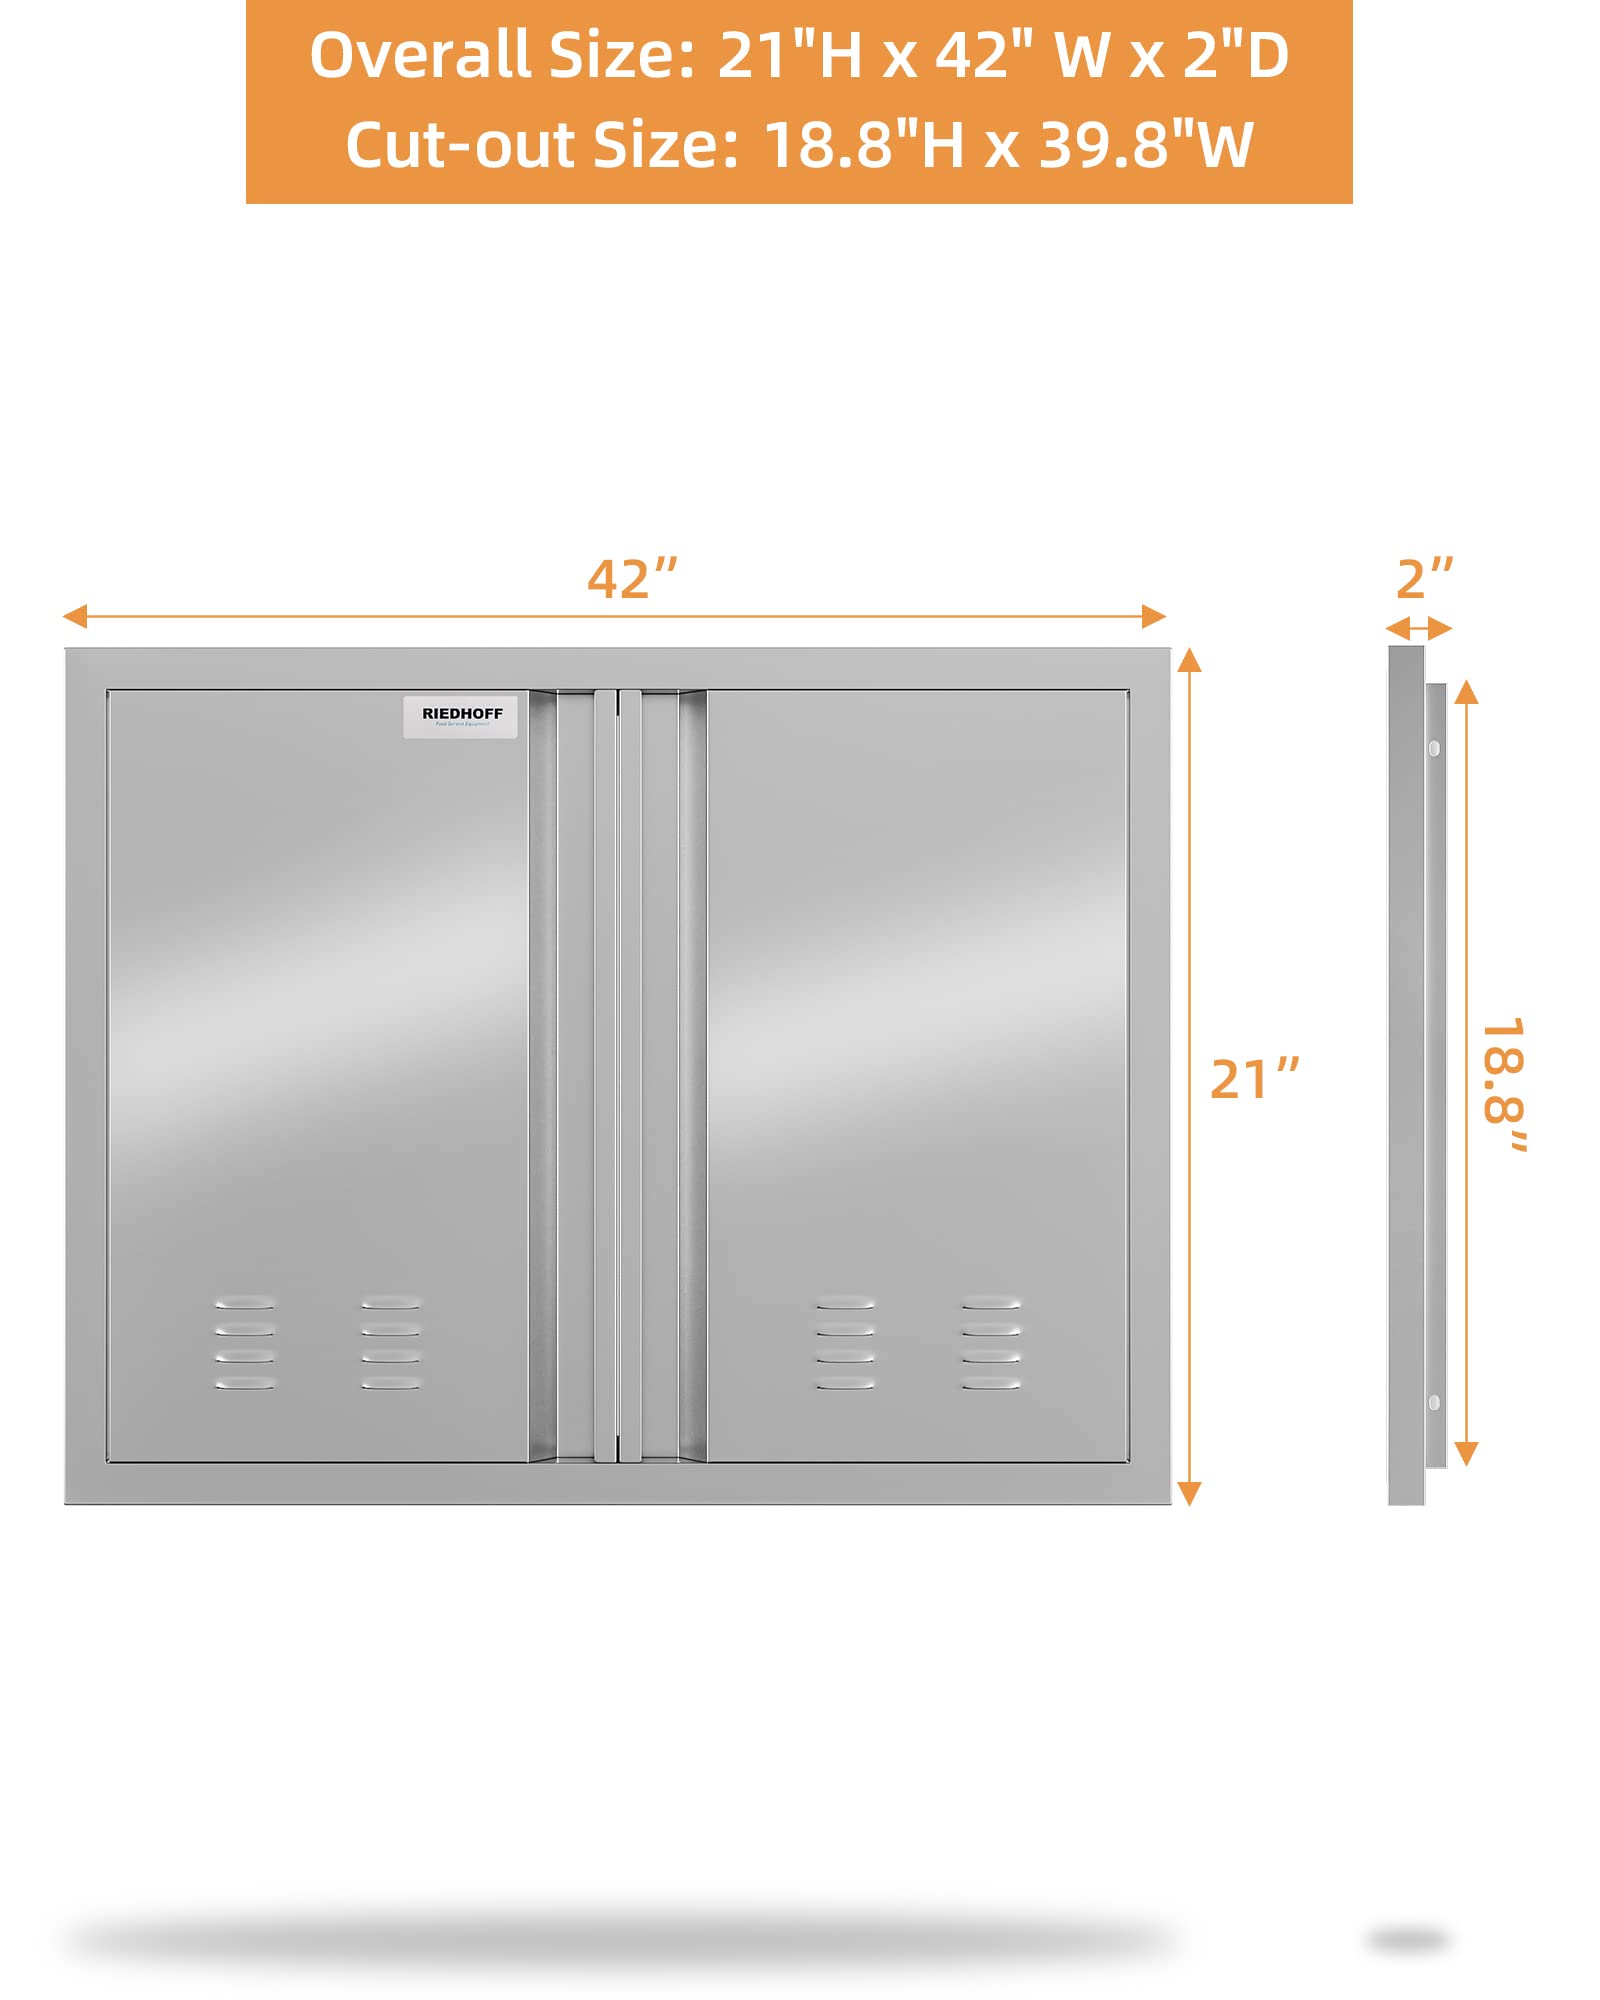 HA-EMORE 304 Stainless Steel Outdoor Kitchen Access Door with Recessed Handle, Double Access Door for BBQ Island, Grilling Station - image 2 of 8